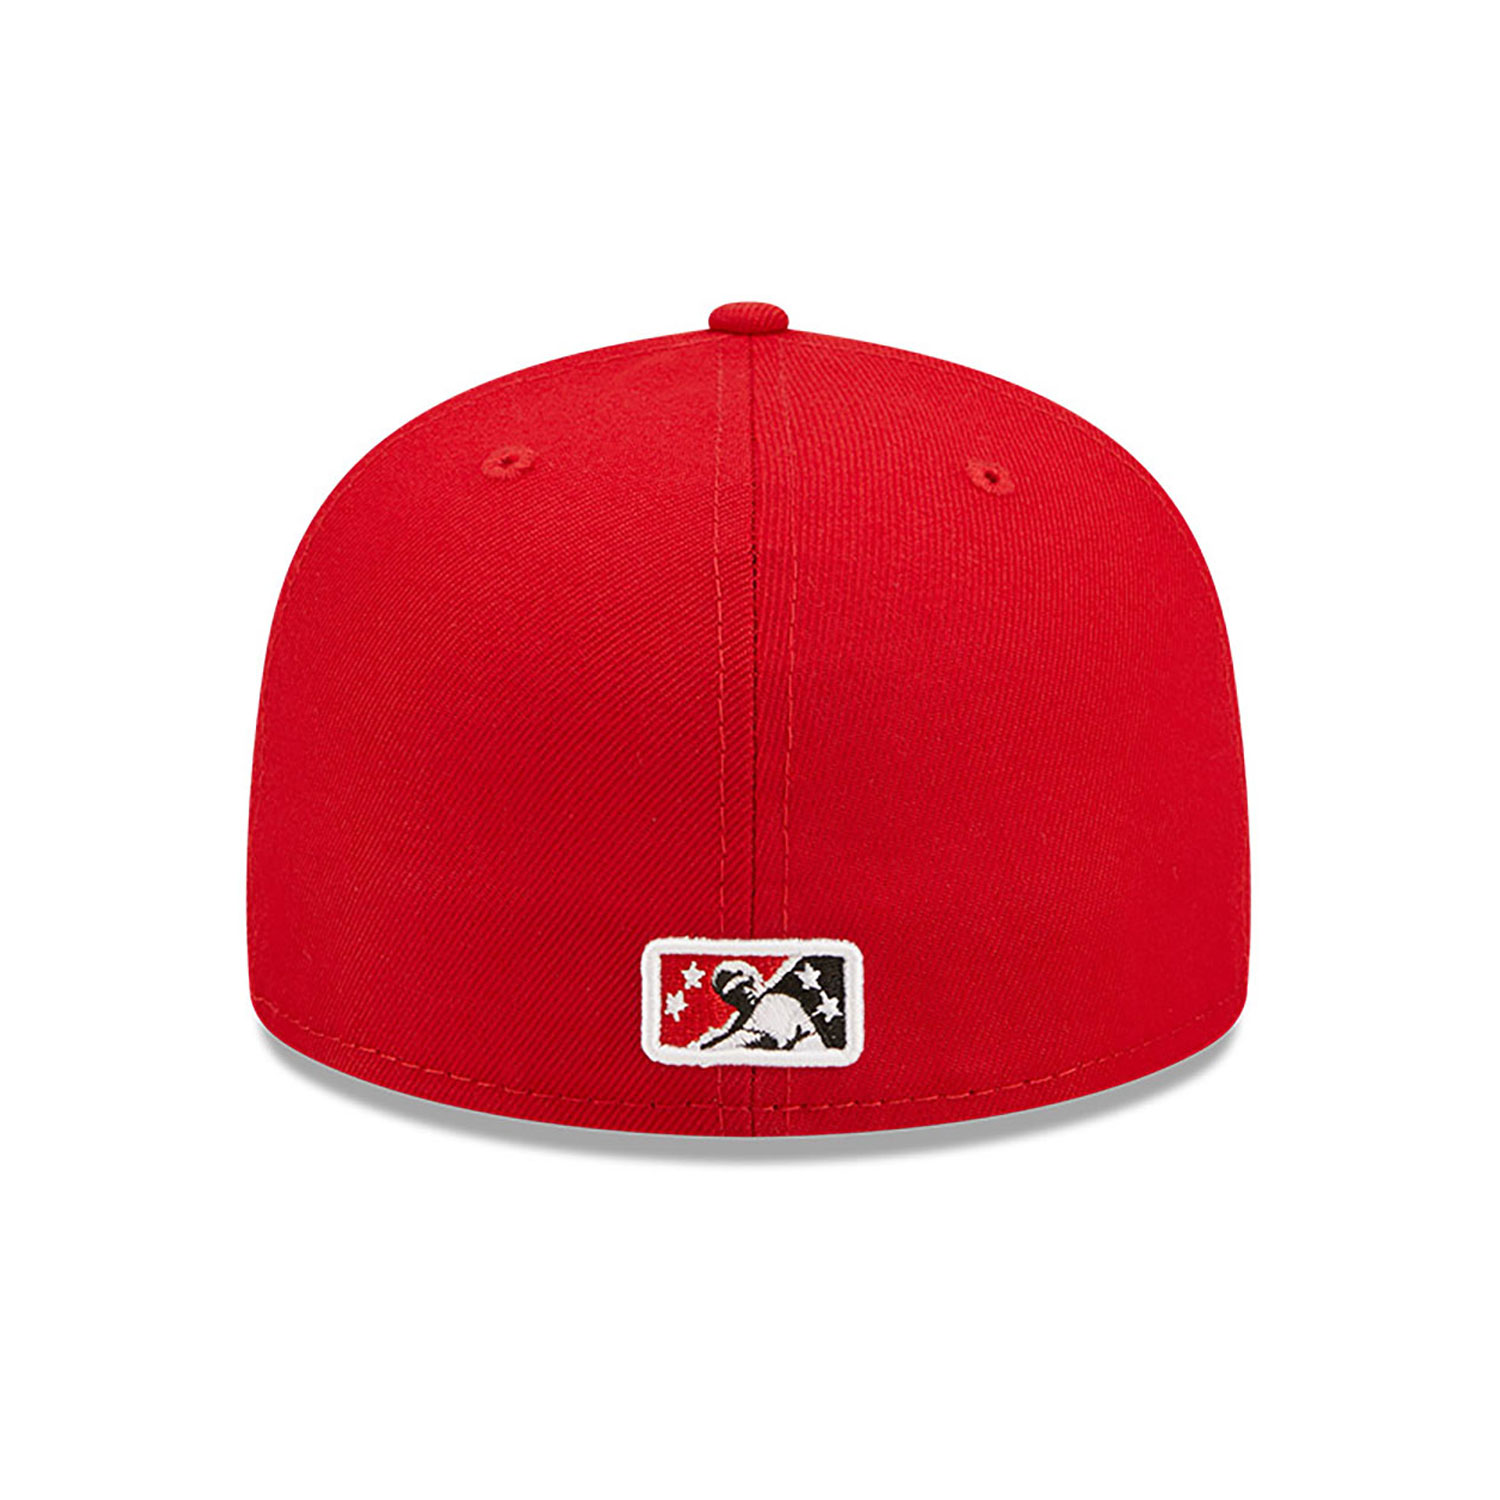 Fresno Grizzlies MiLB Red 59FIFTY Fitted Cap